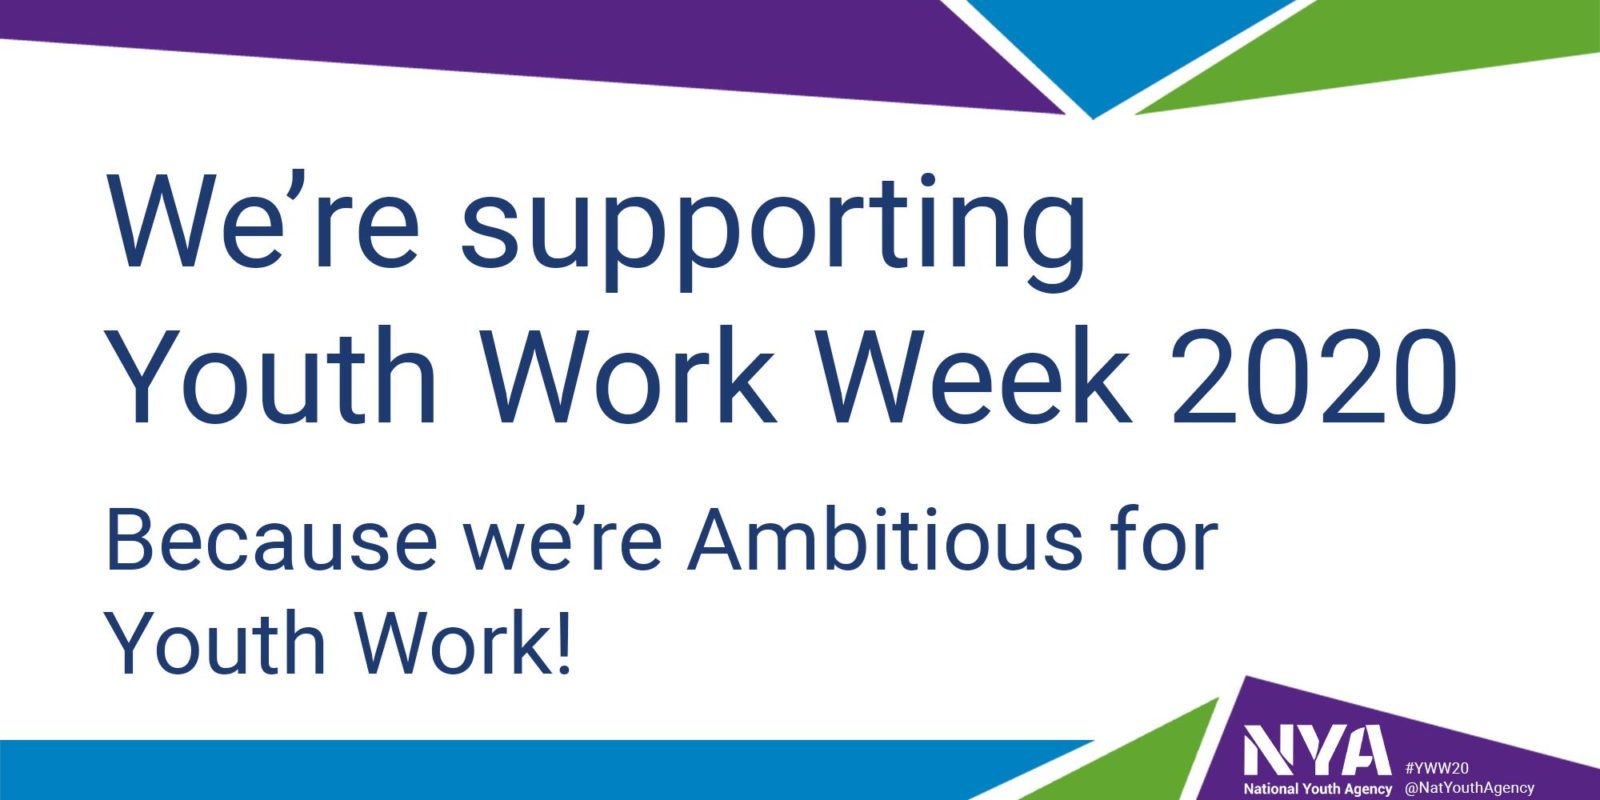 Supporting youth work week